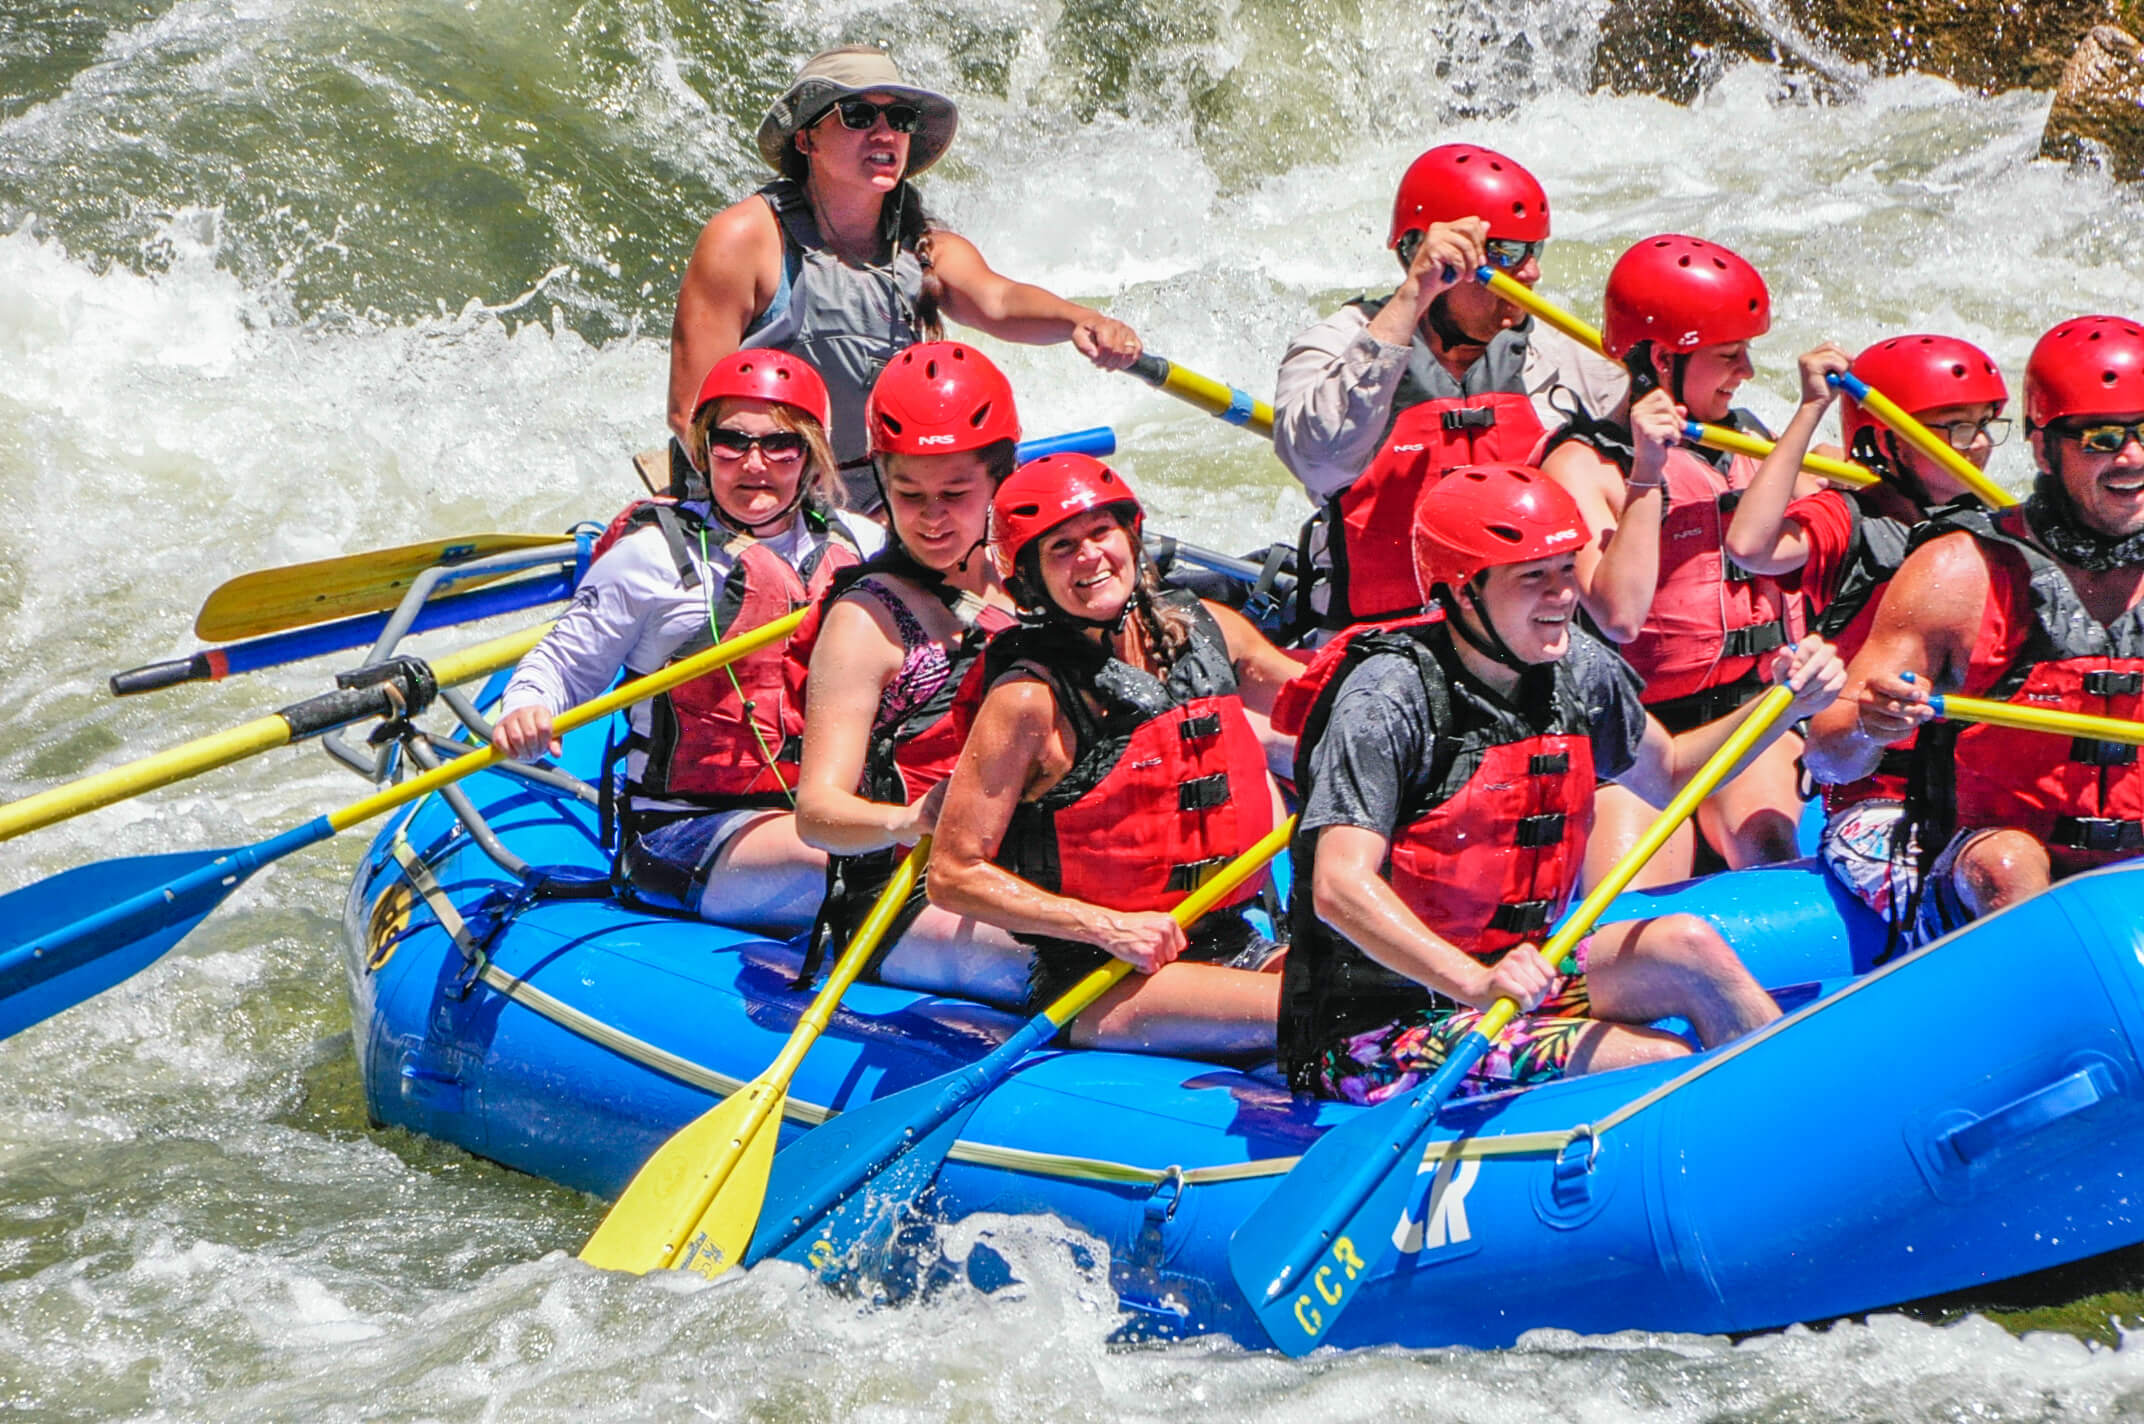 An image of rafters and their guide charging through river rapids. It is apparent that the guide is giving paddle instructions to the group.